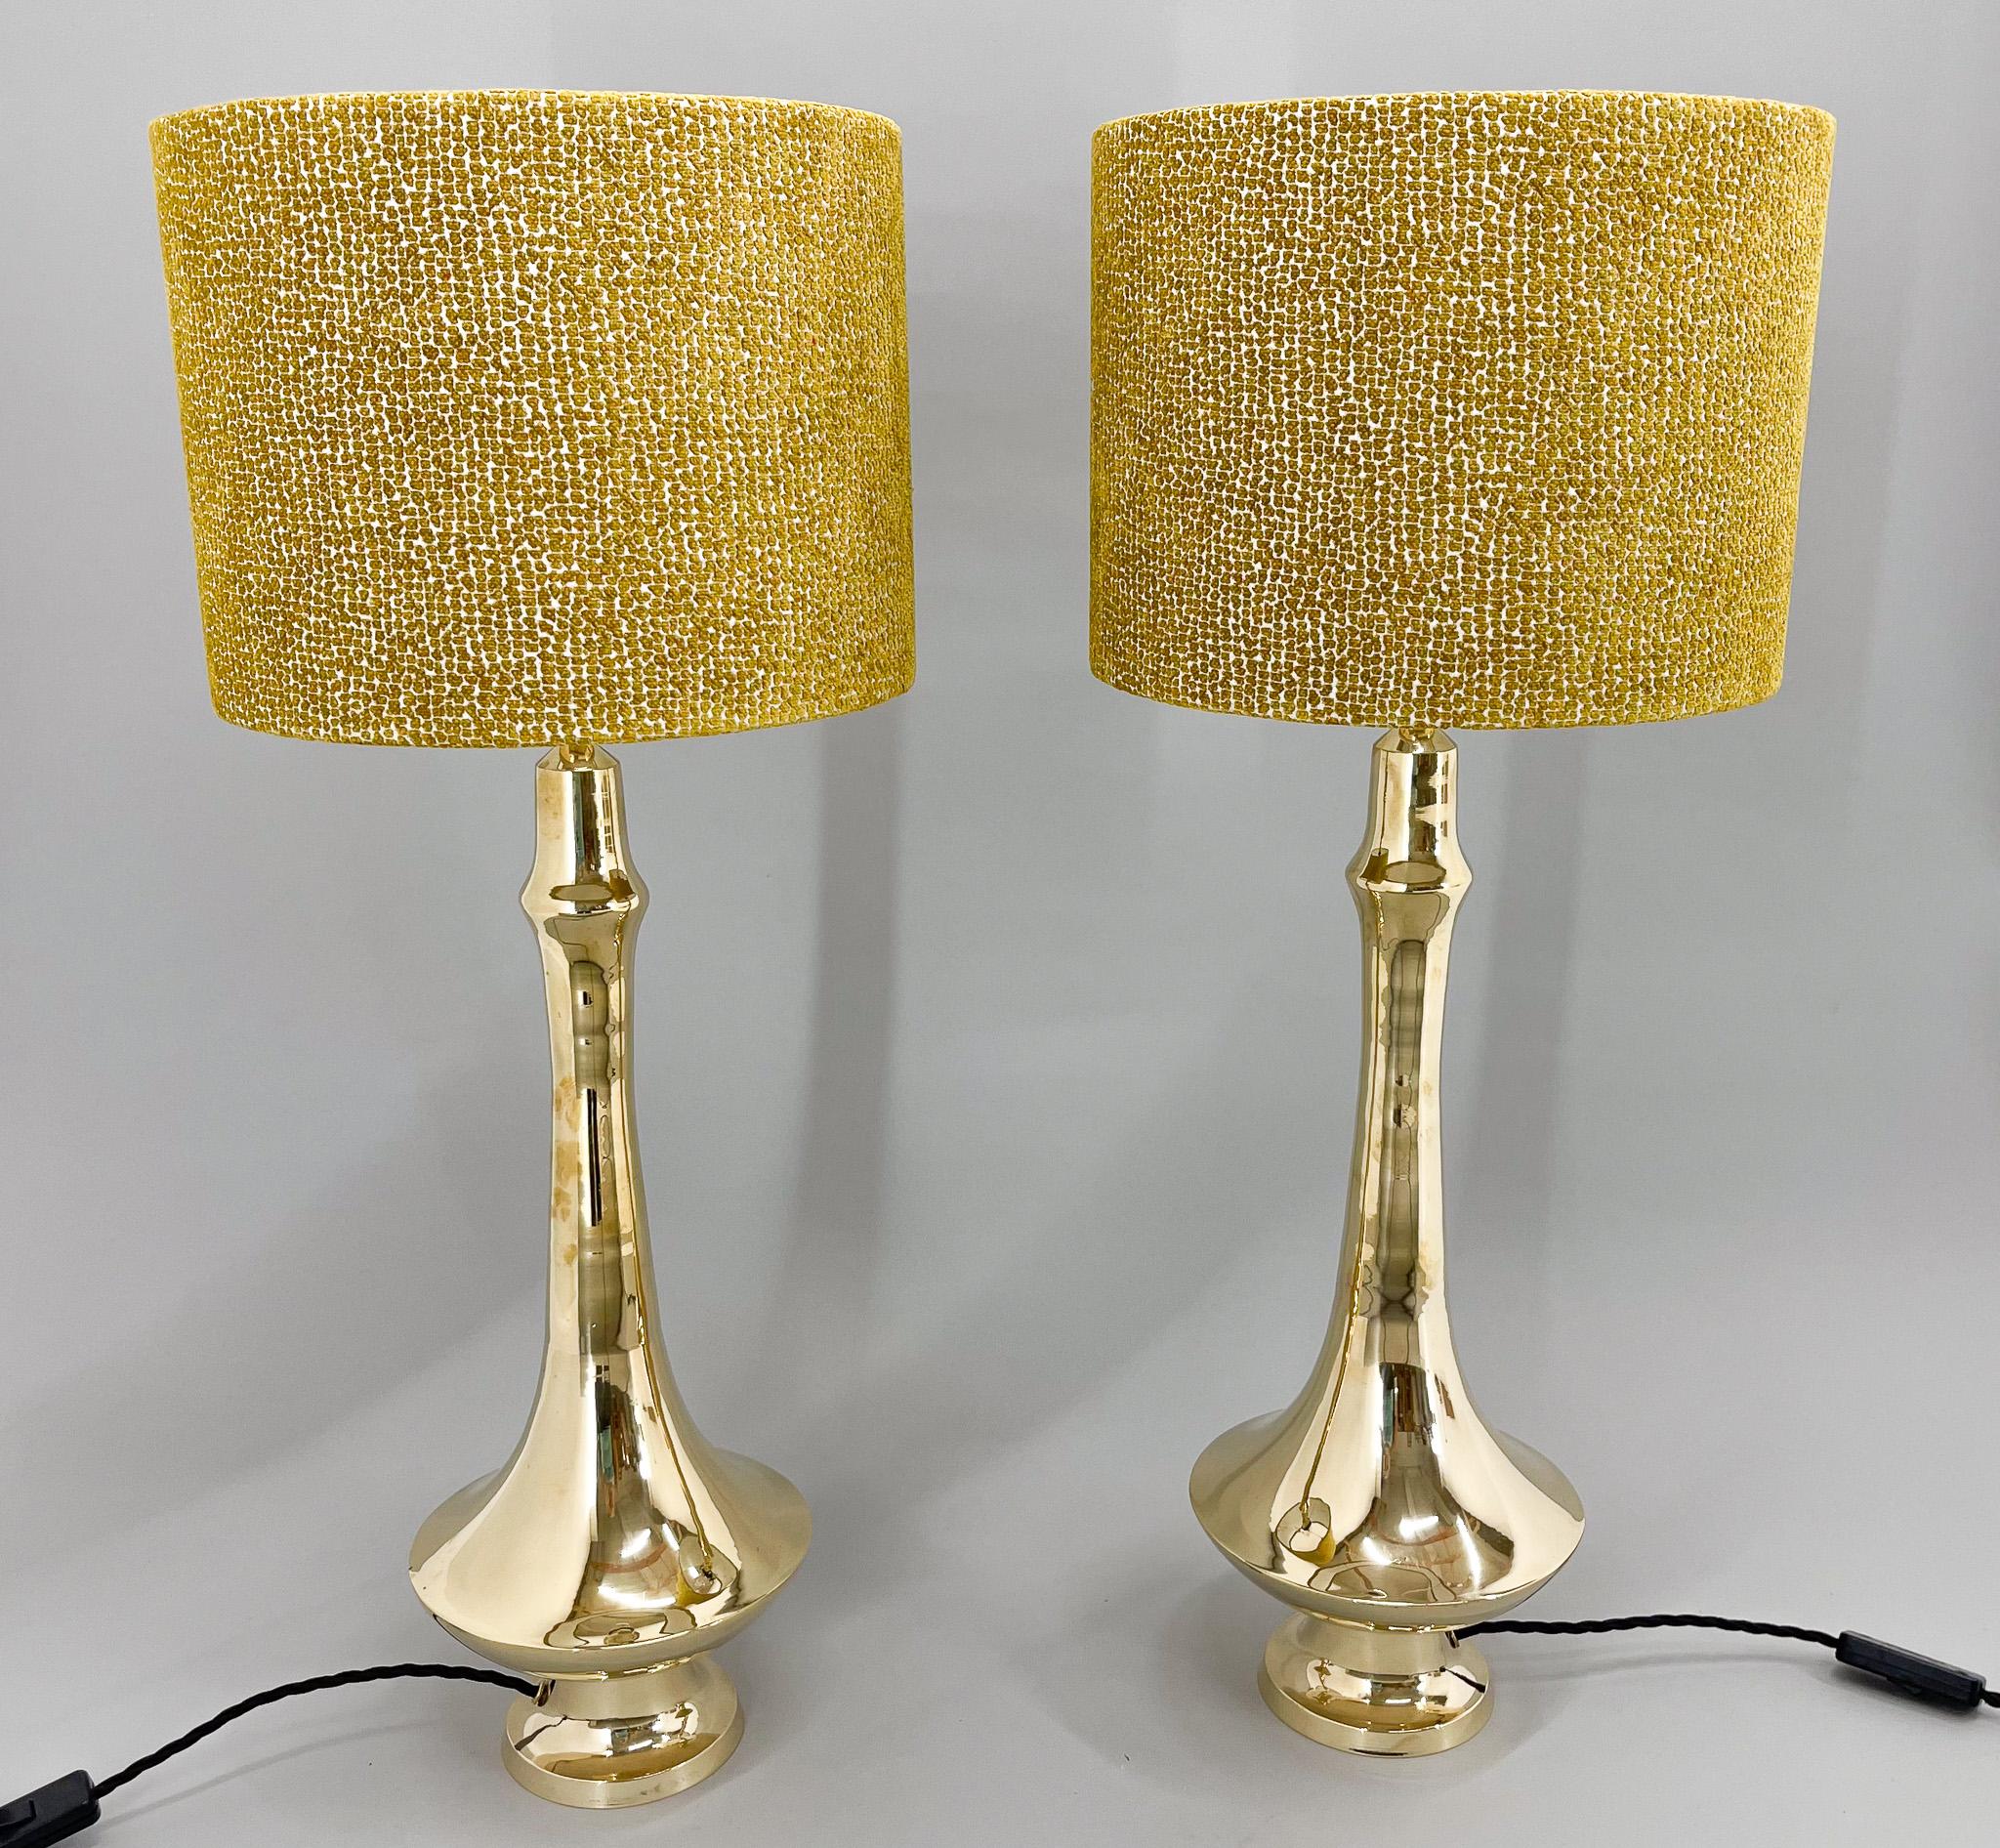 Set of two vintage tall table lamps with all-brass base. The lamps were restored, have new wiring and new handmade lamp shades. Bulb: 1 x E25-E27. US plug adapter included.